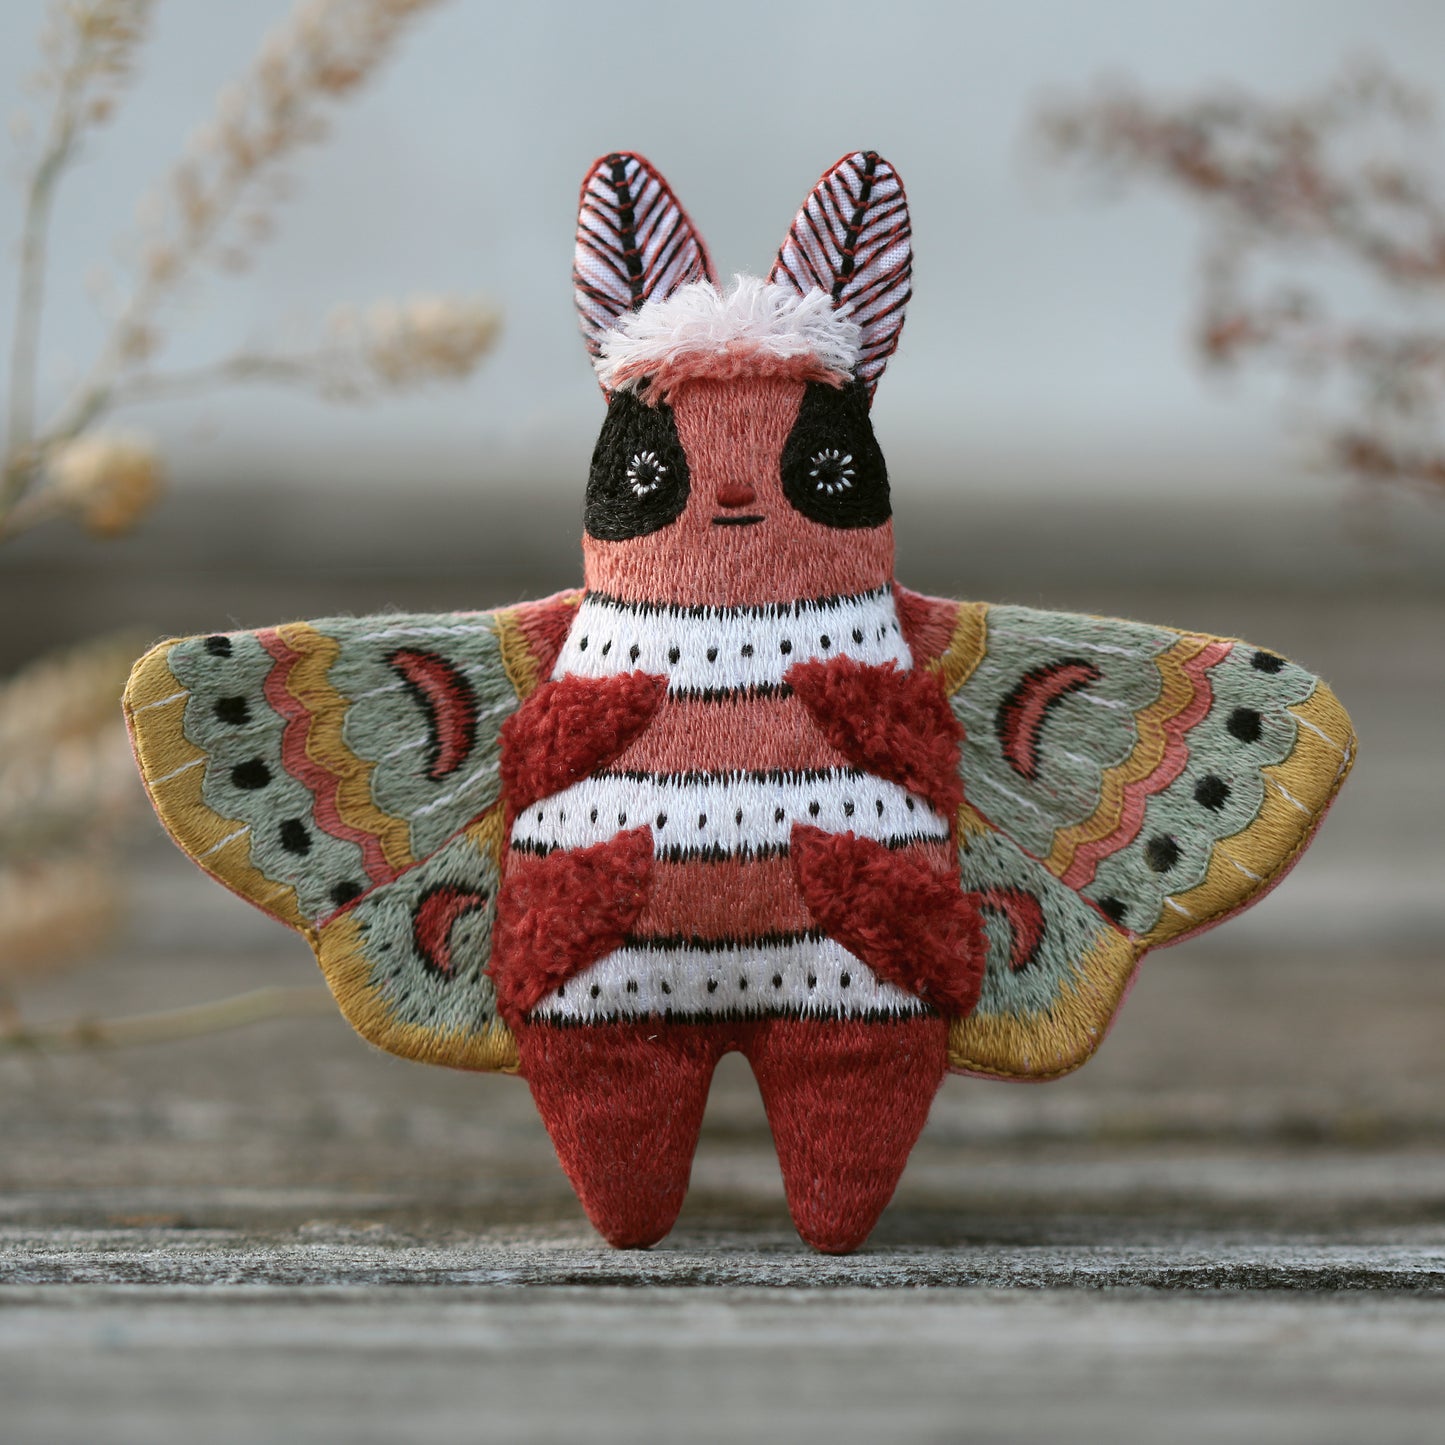 Moth - Embroidery Kit